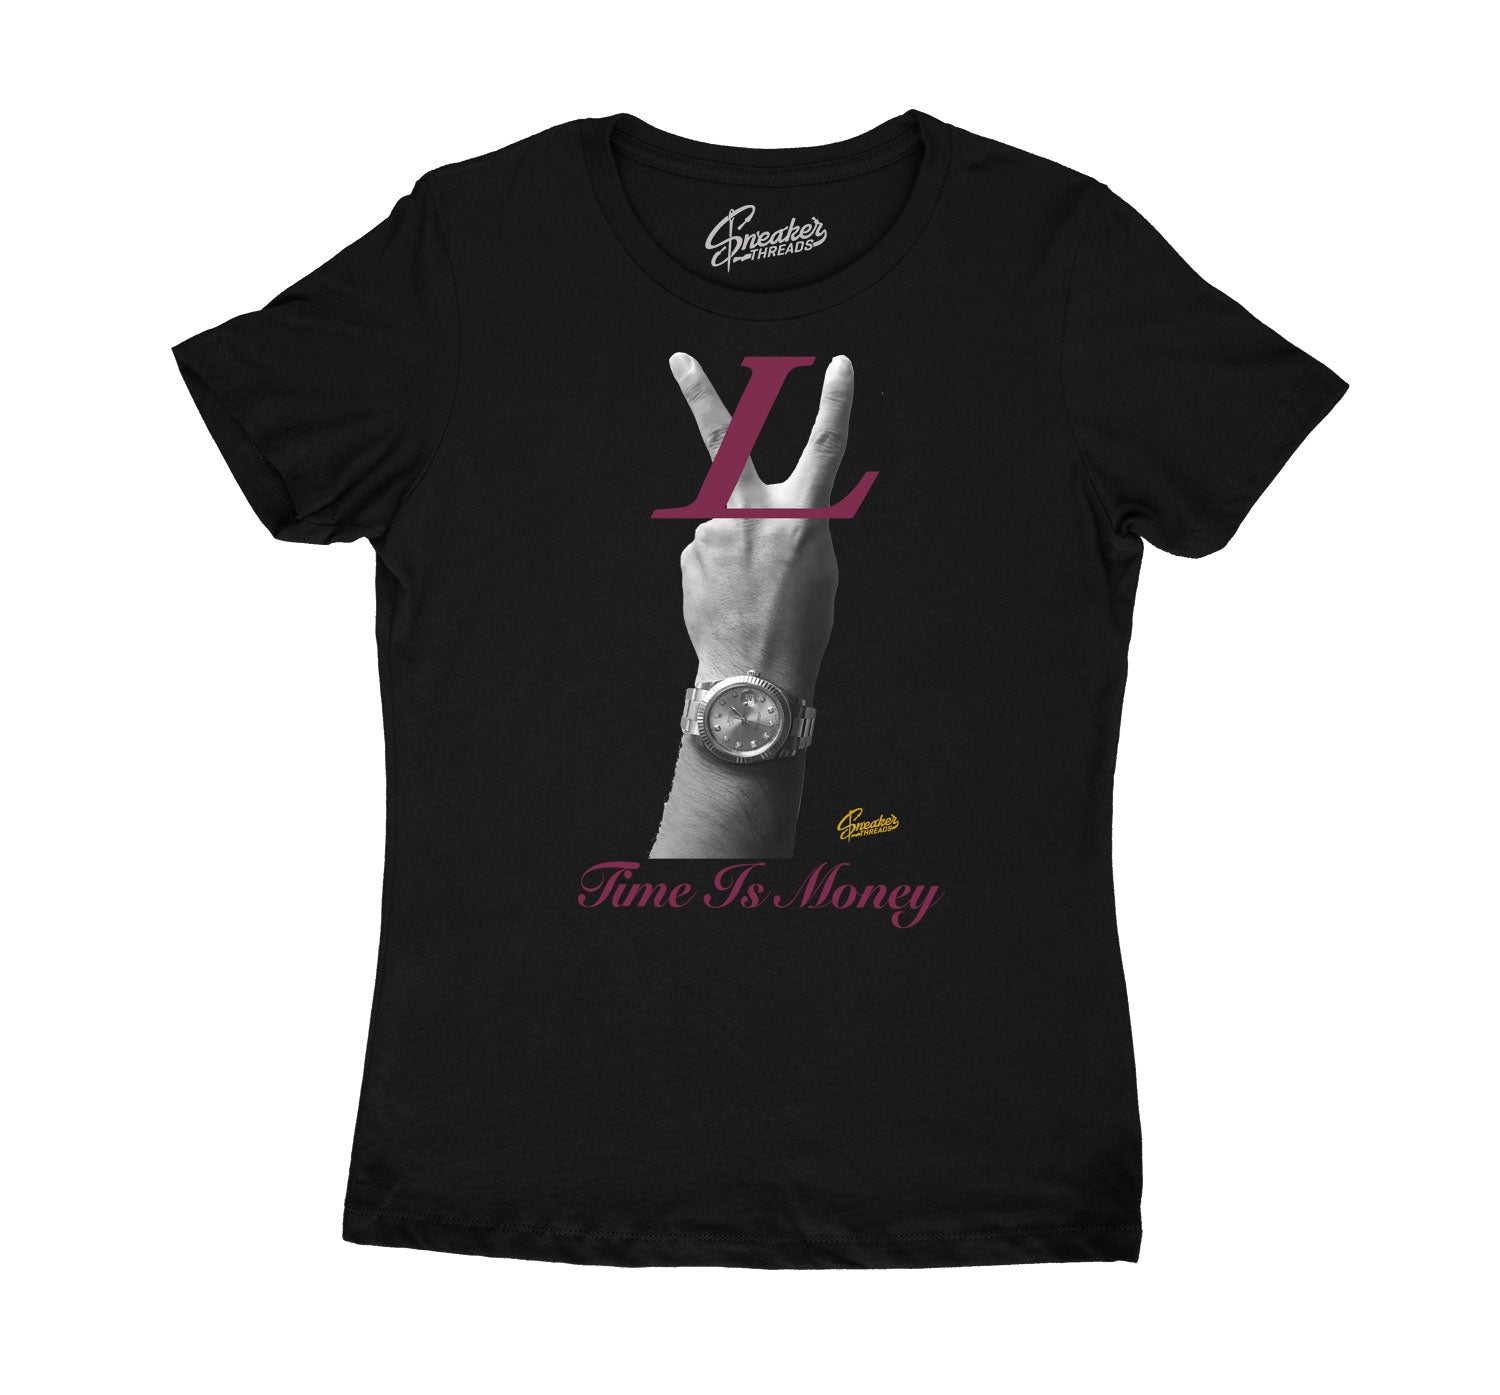 Womens Singles Day 6 Shirt - Time Is Money - Black